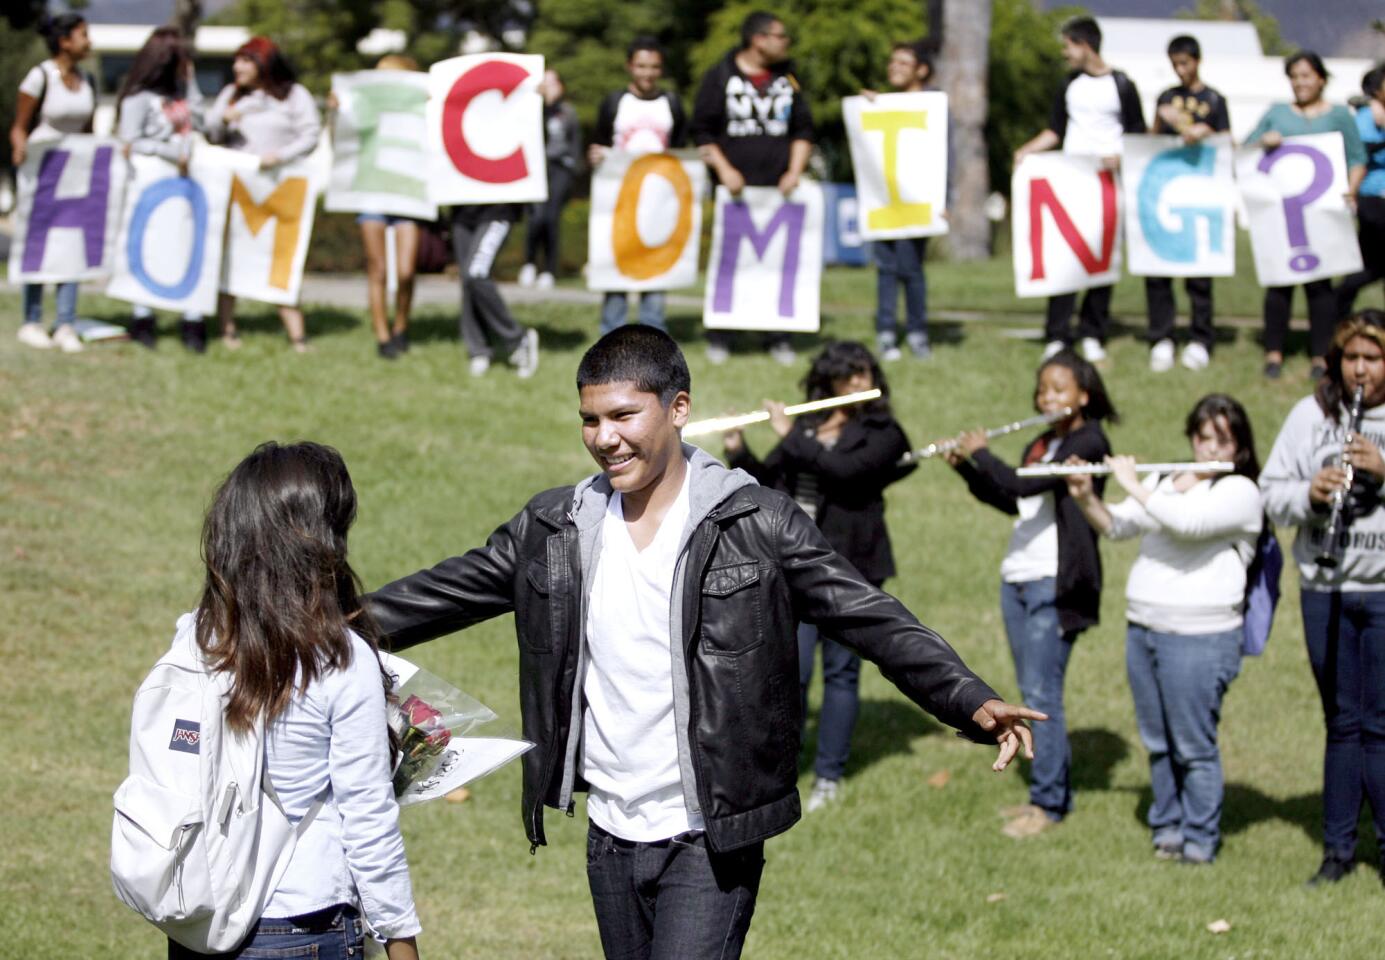 With Journey's "Don't Stop Believing" played by some band members in the background, Muir High School freshman Abraham Romero, 14, brought some friends along for encouragement as he asked freshman Michelle Rios, 14, out to the school's Homecoming, during lunch at the Pasadena school on Wednesday, Oct. 10, 2012. The moment she said yes, Romero spread his arms in delight and gave Rios a big hug. Romero's sister made the signs in the background, friends helped hold them up and some of the band members came along to play.